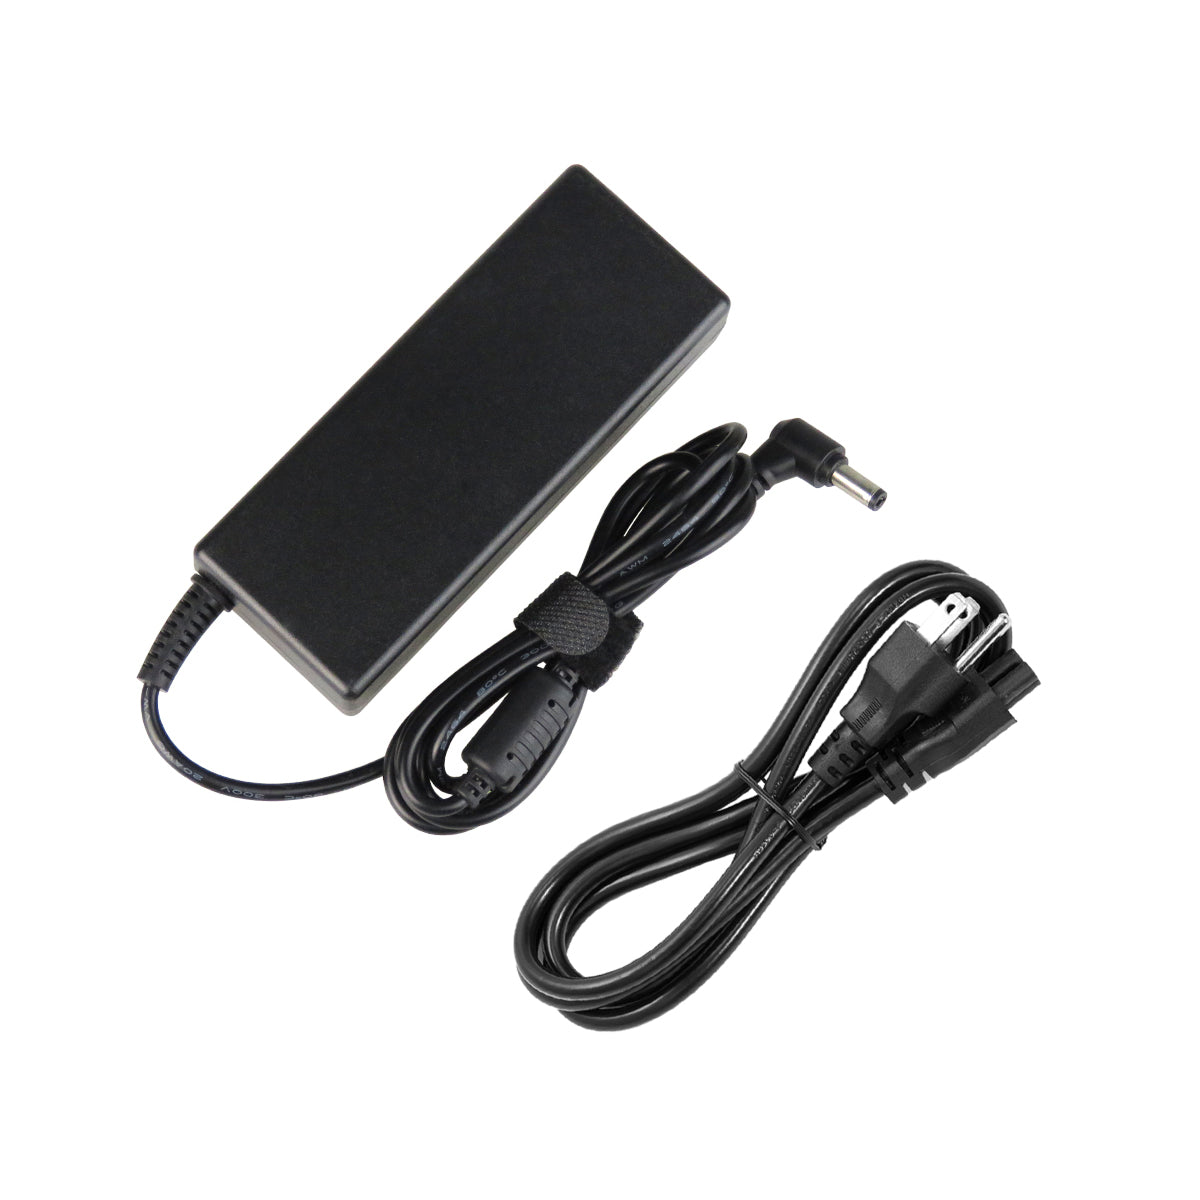 AC Adapter Charger for Gateway M680 Notebook.